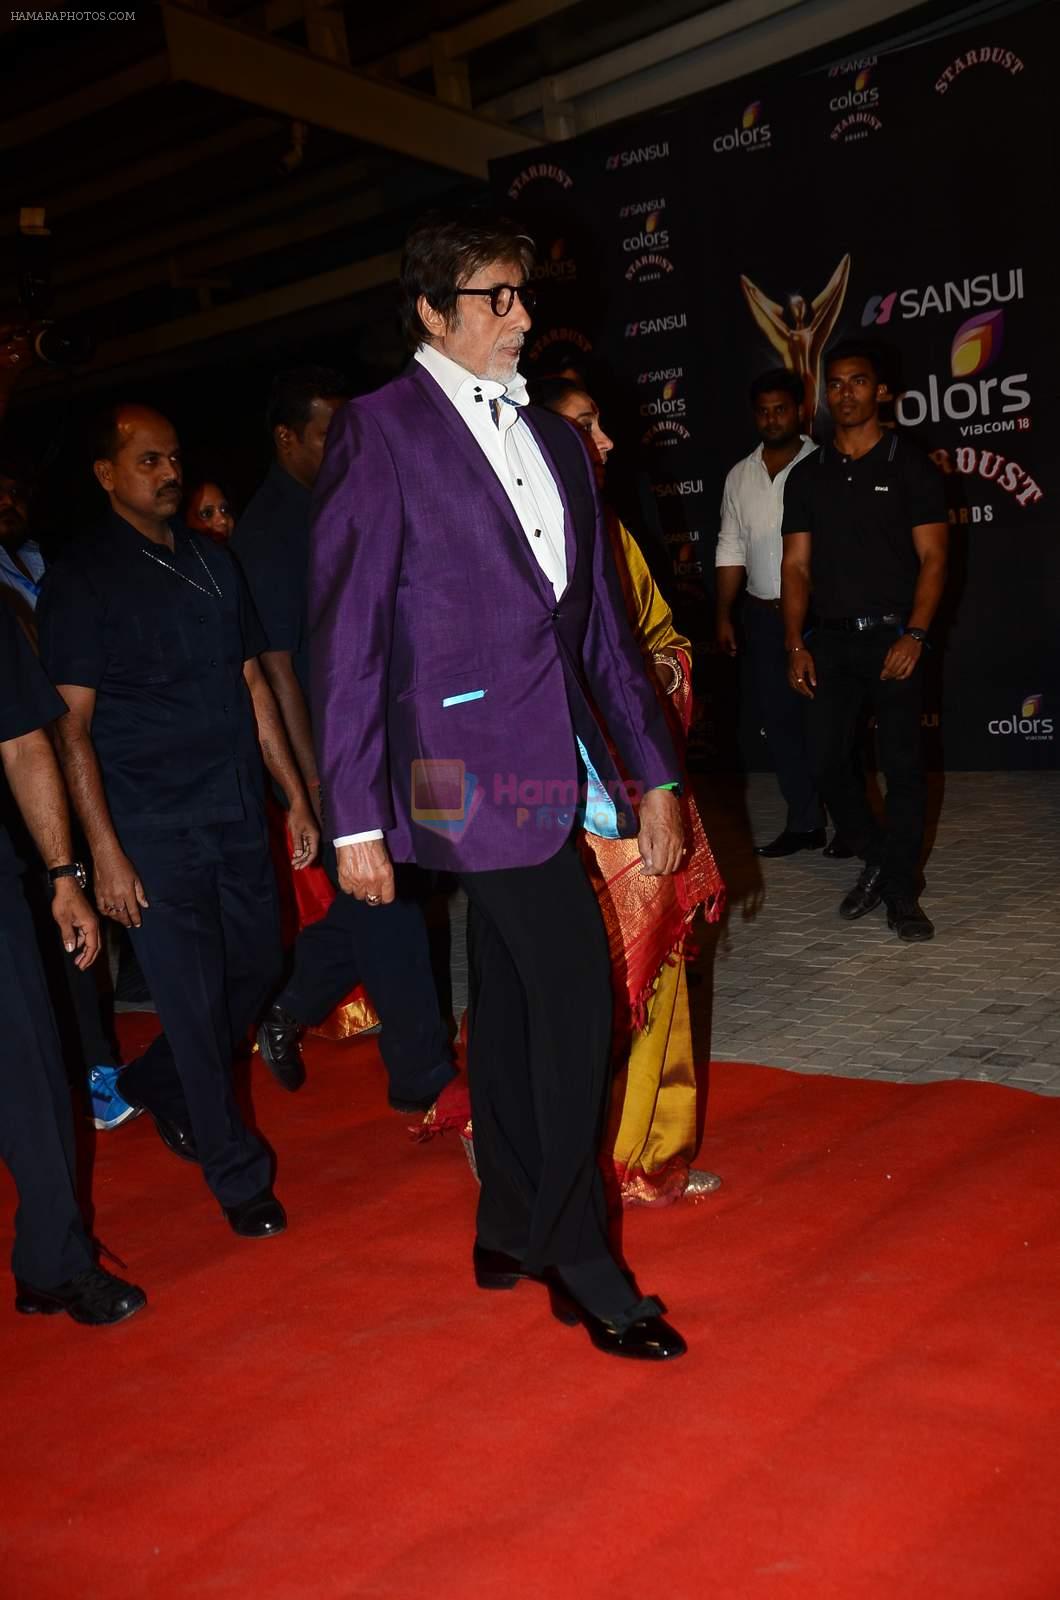 Amitabh Bachchan at the red carpet of Stardust awards on 21st Dec 2015